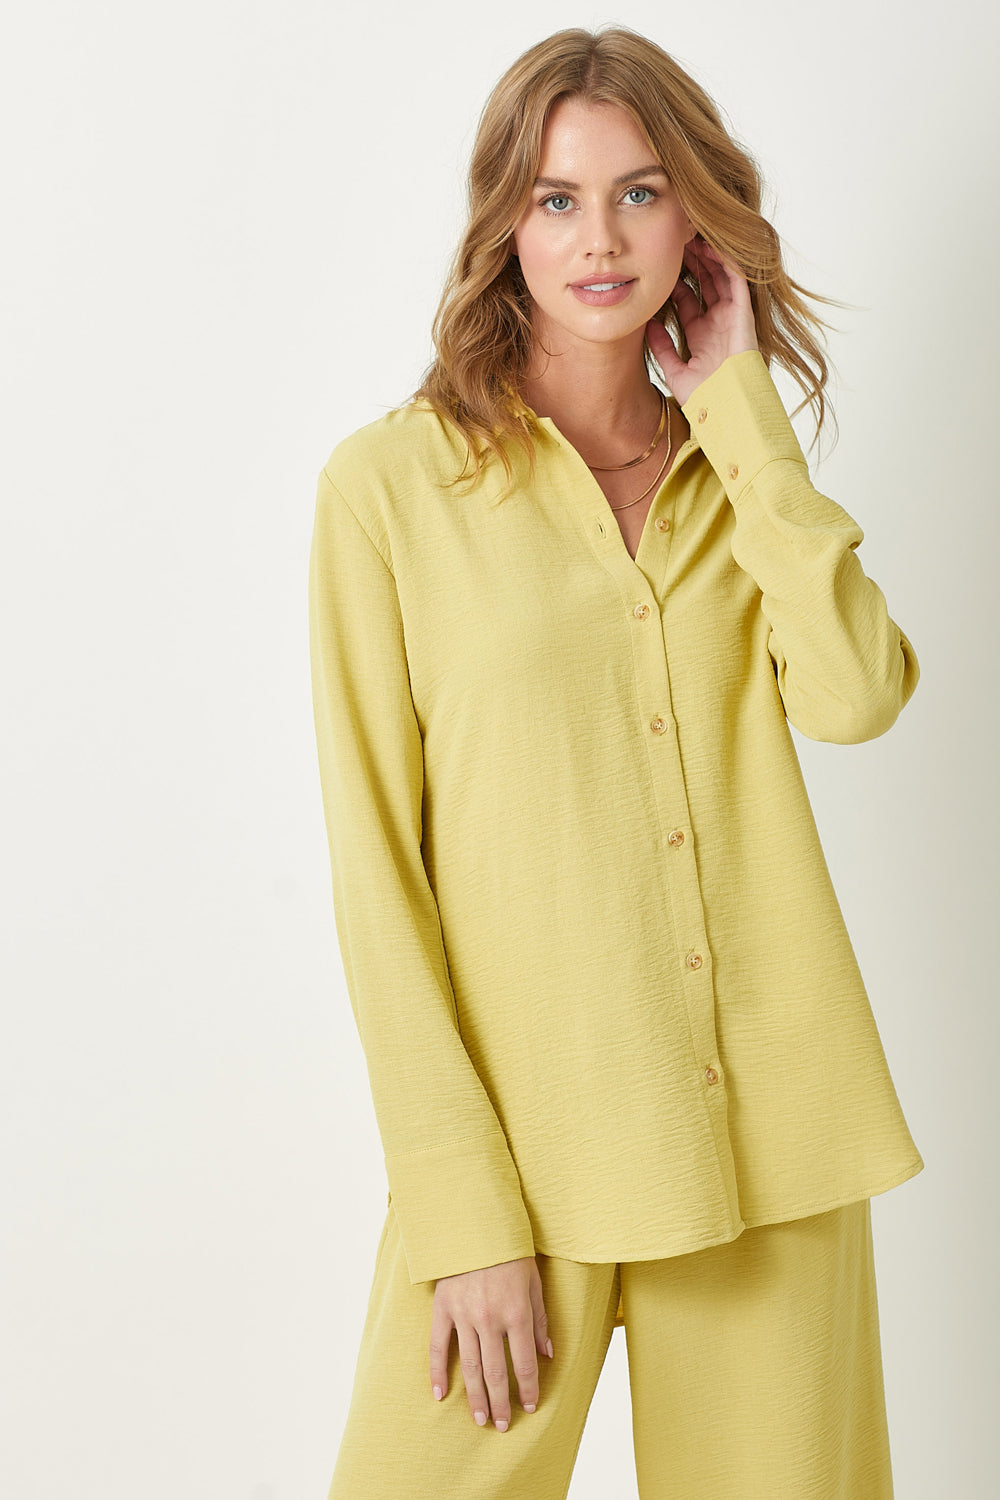 Elevate your wardrobe with this playful Muted Lemon Button Down Blouse. Versatile for office or casual outings.